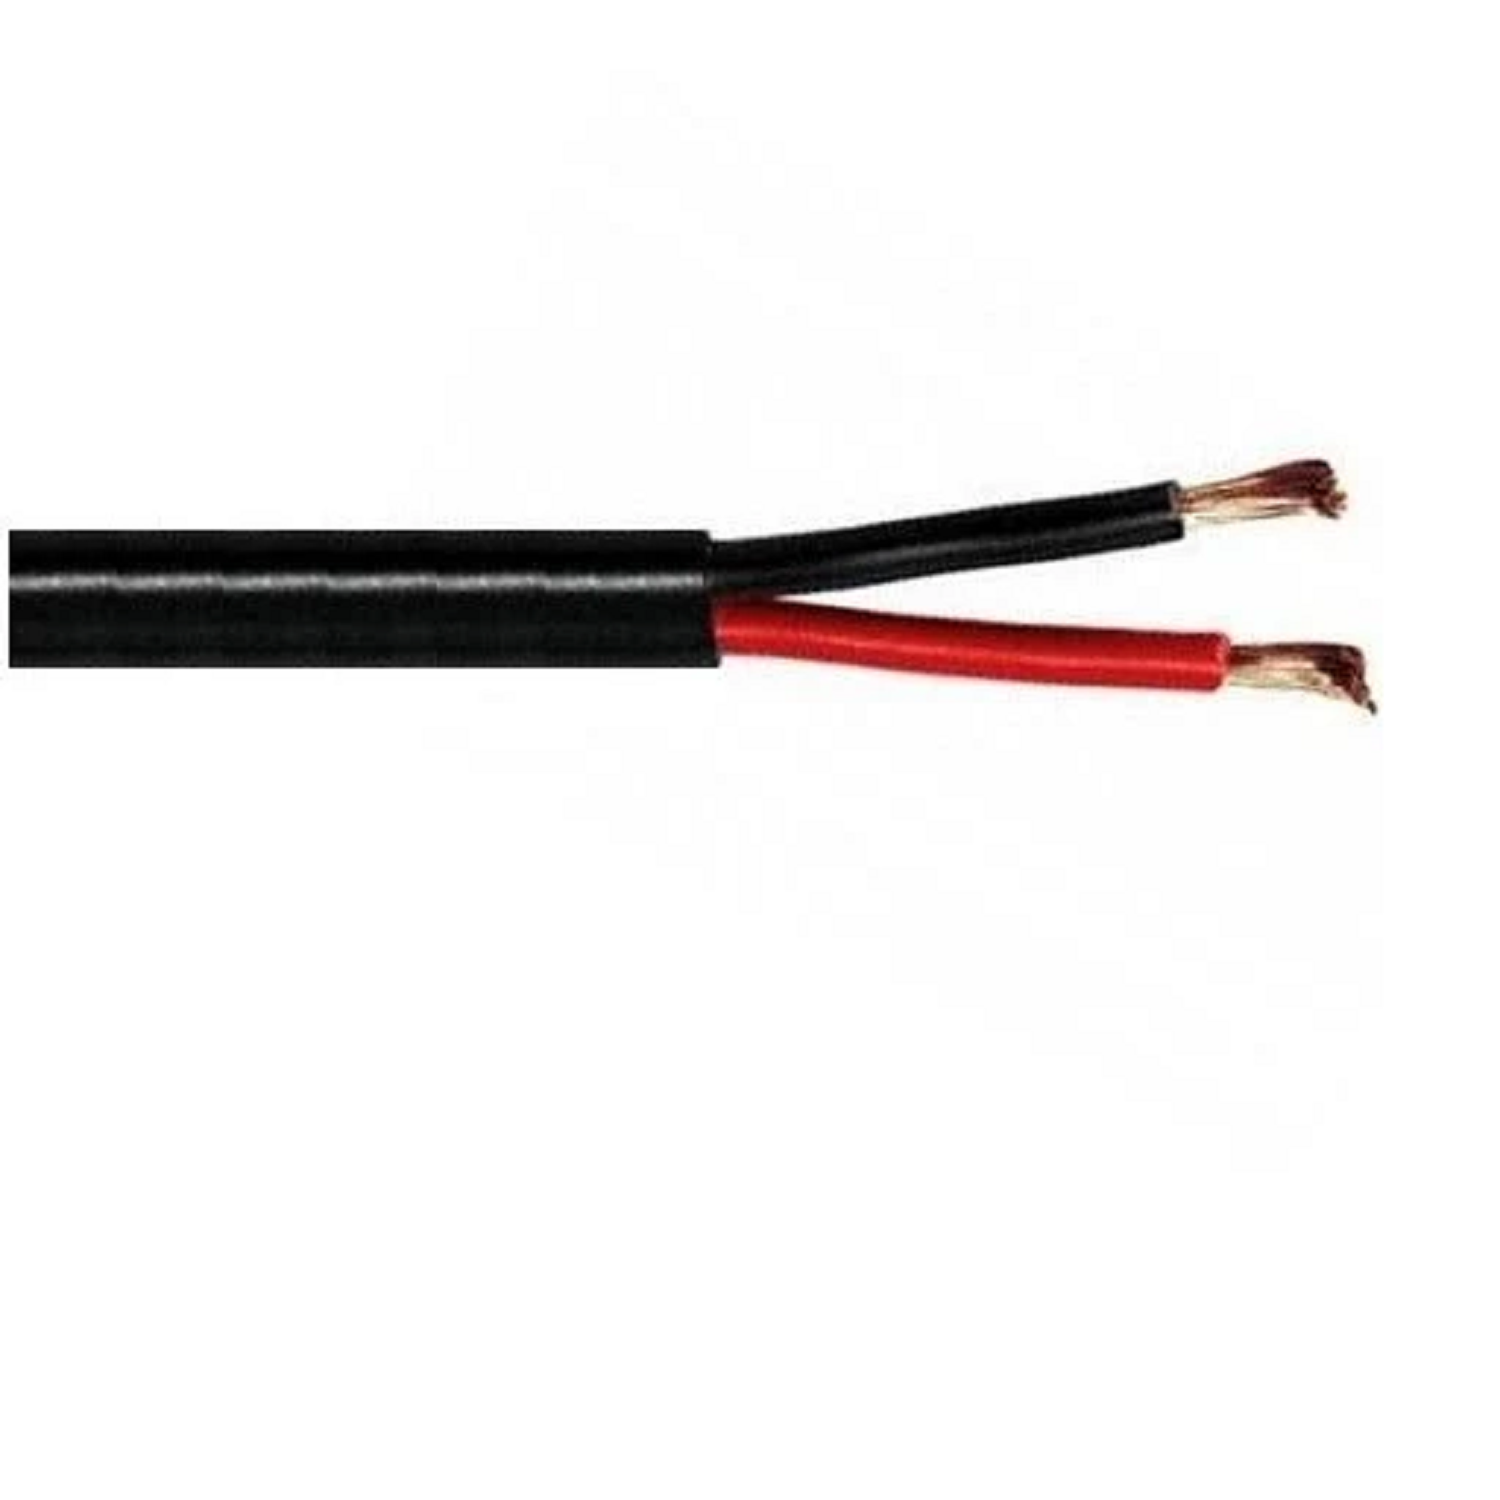 0.75 Sqmm Polycab Copper Flexible Cable (11 KV) With PVC Insulated Sheathed - Black